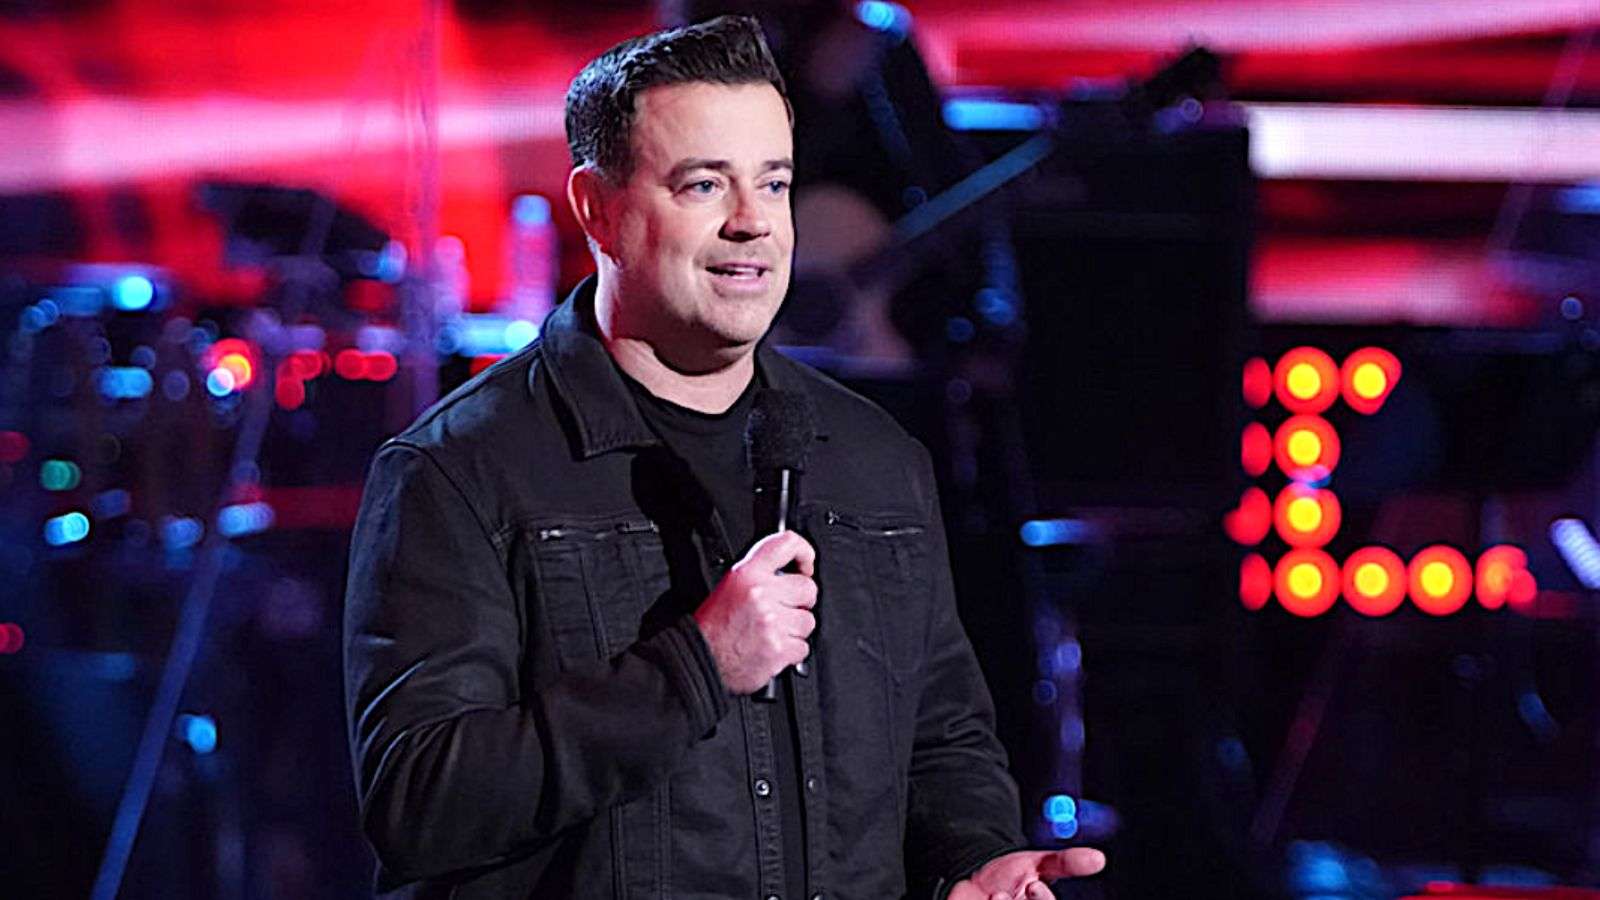 Carson Daly The Voice